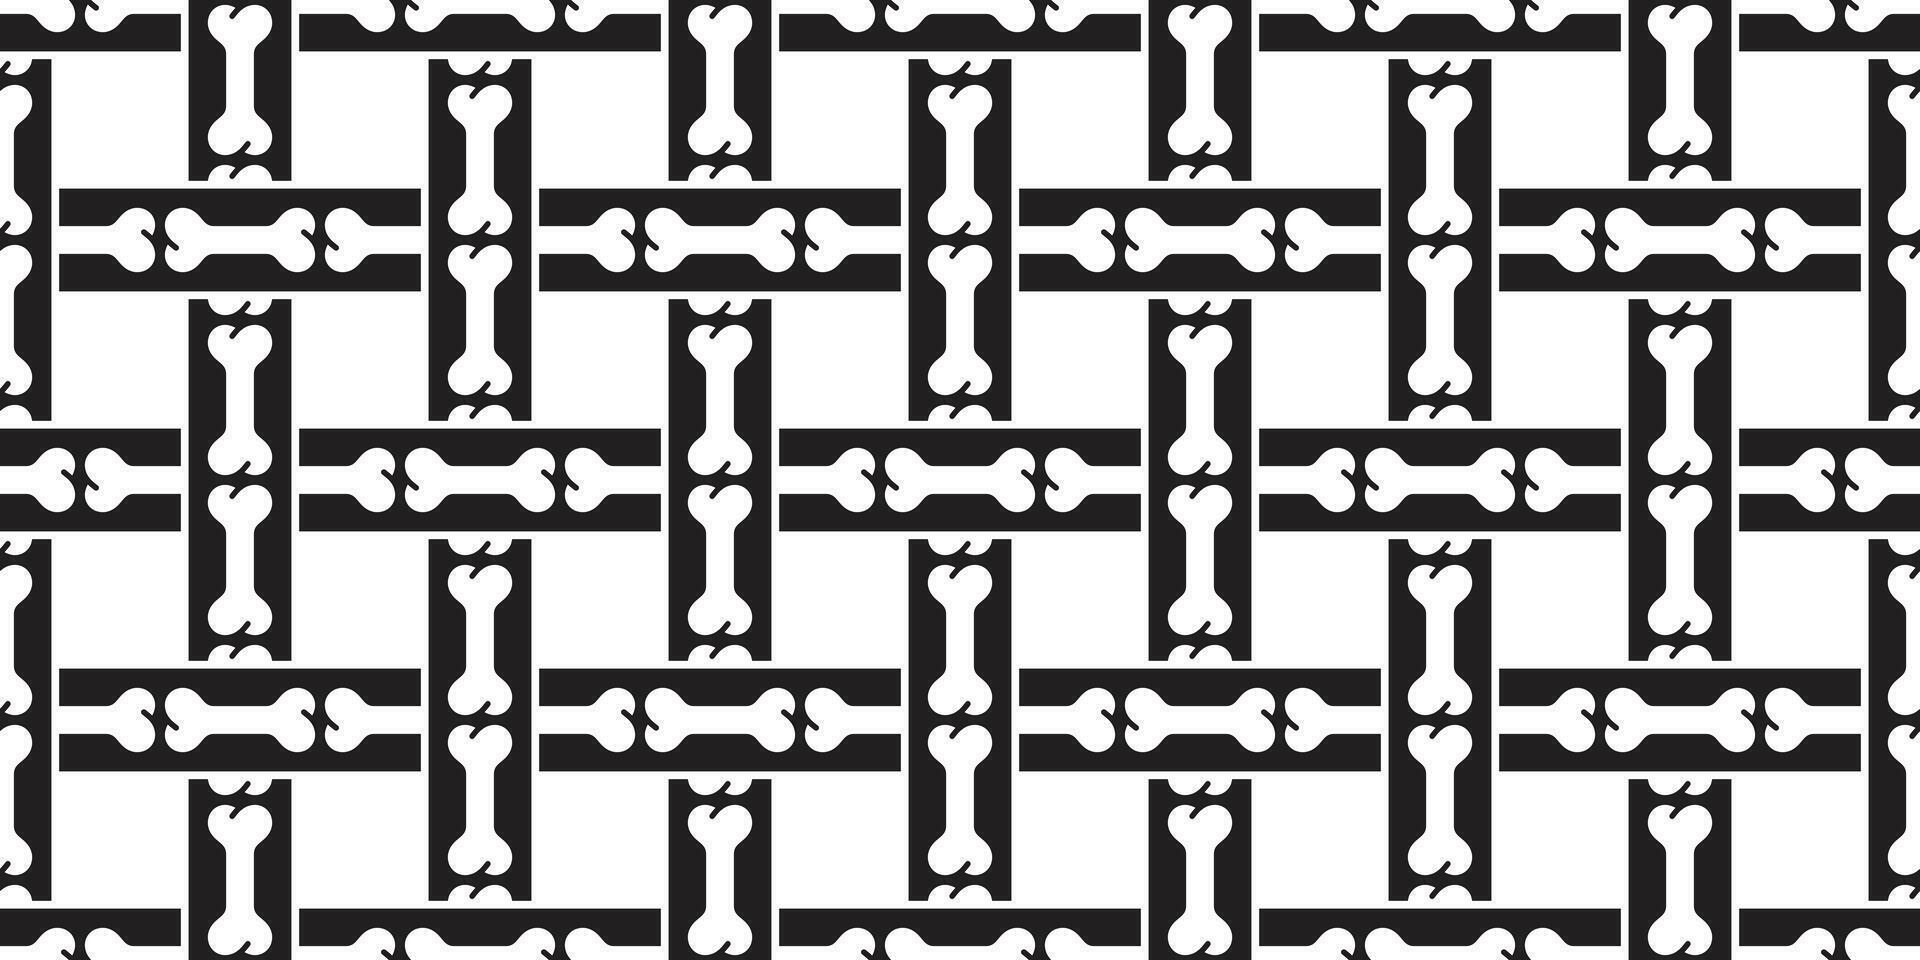 dog bone seamless pattern checked footprint paw french bulldog puppy pet cartoon skeleton halloween tile background scarf isolated repeat wallpaper doodle illustration design white vector